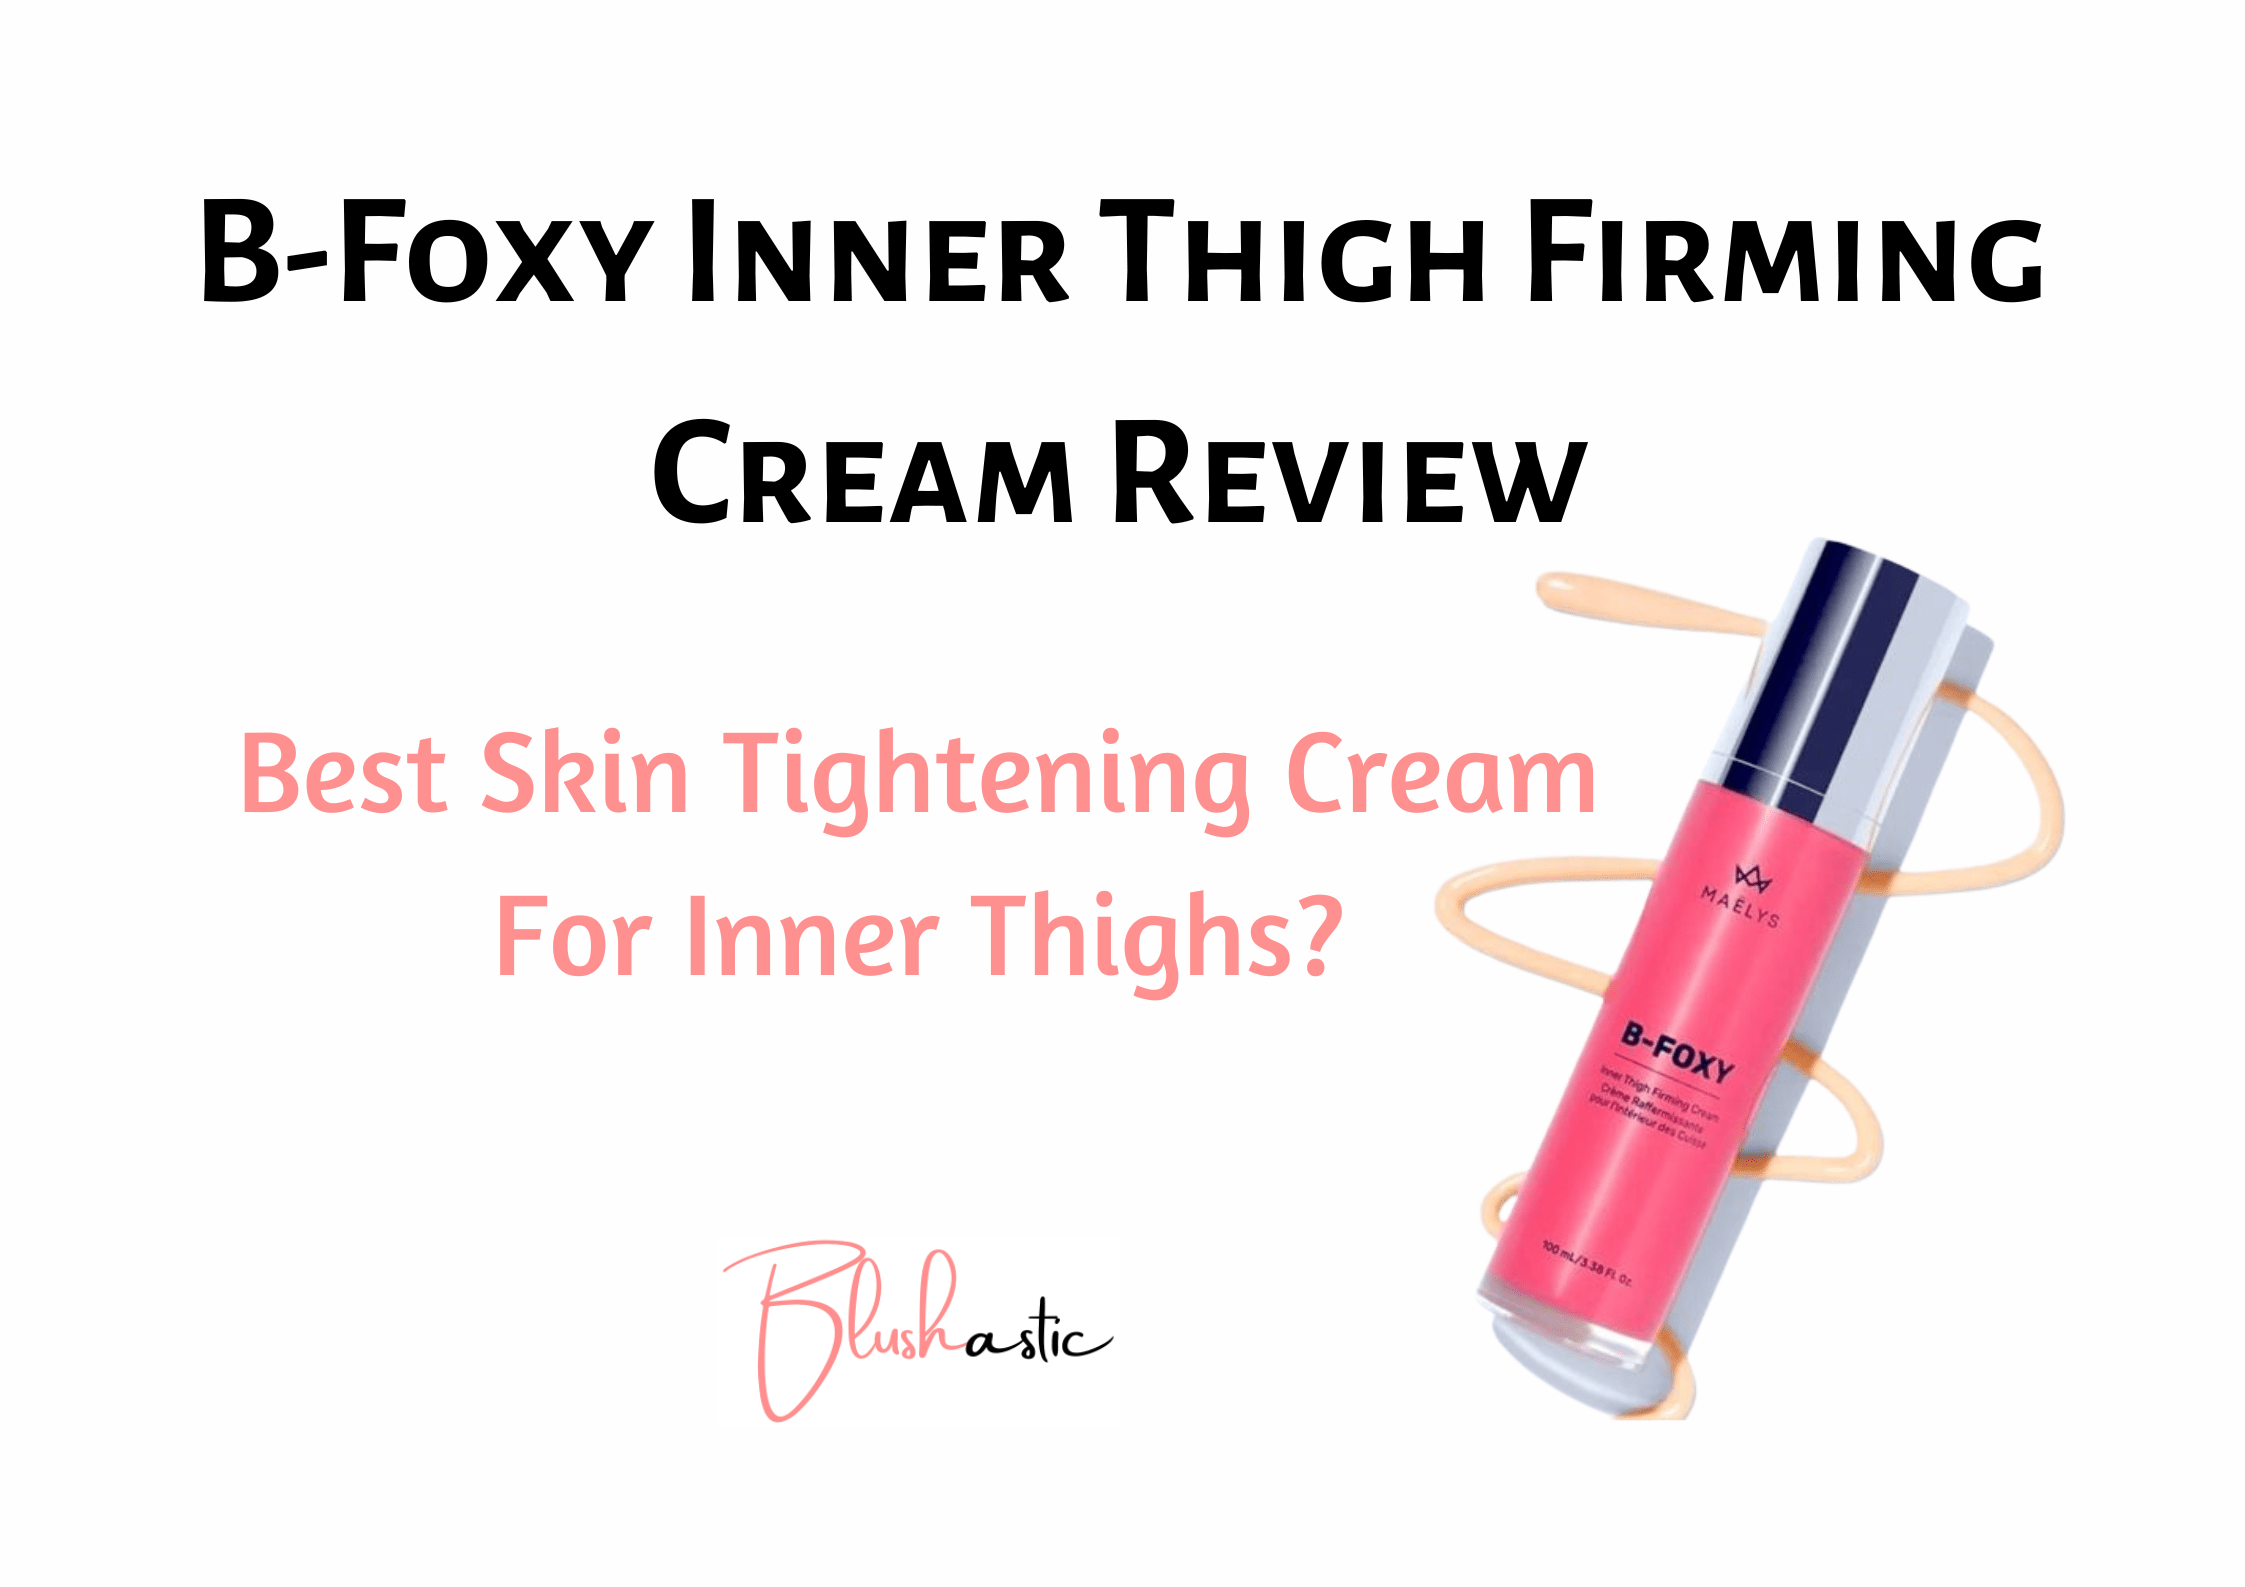 B-Foxy Inner Thigh Firming Cream Review | Worth It? - Blushastic